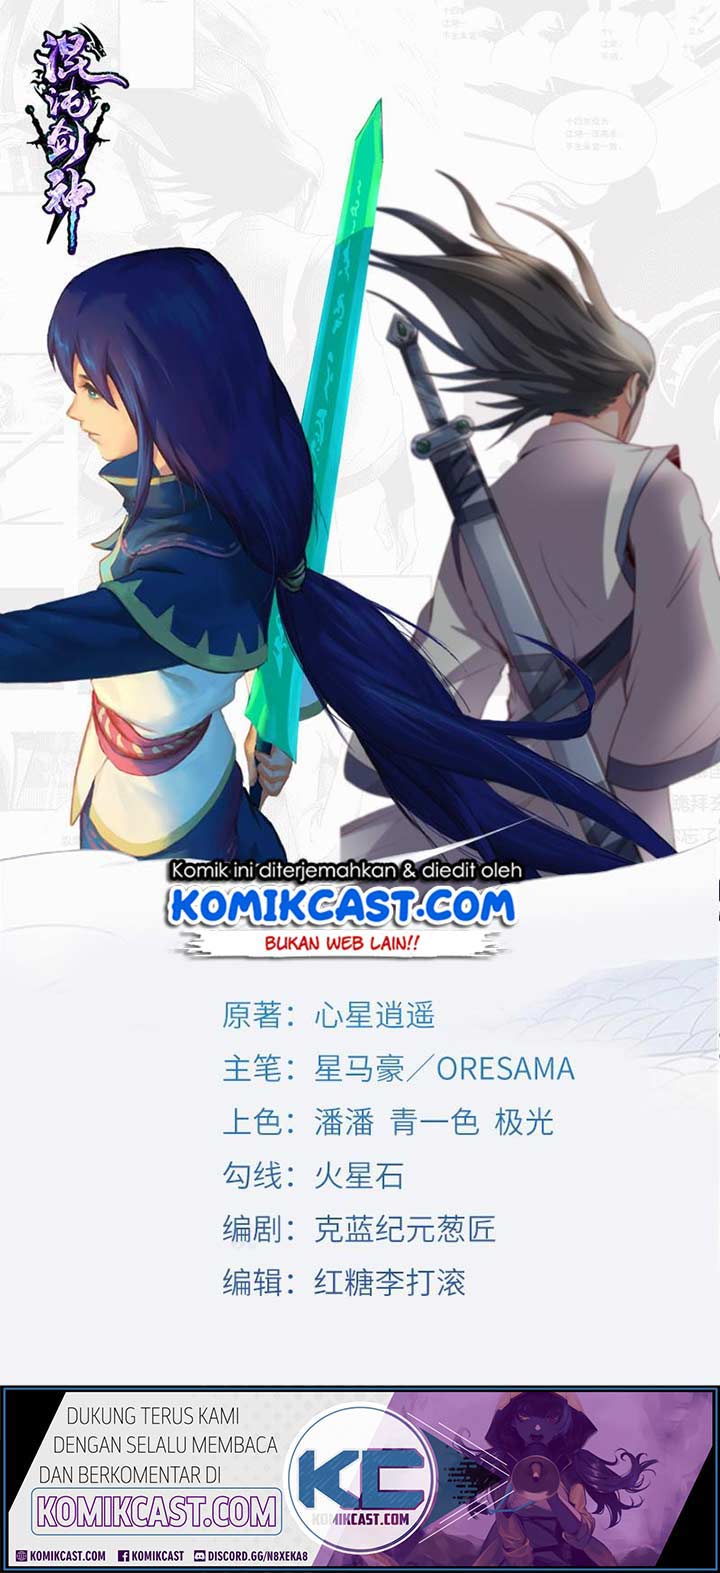 Chaotic Sword God Chapter 194